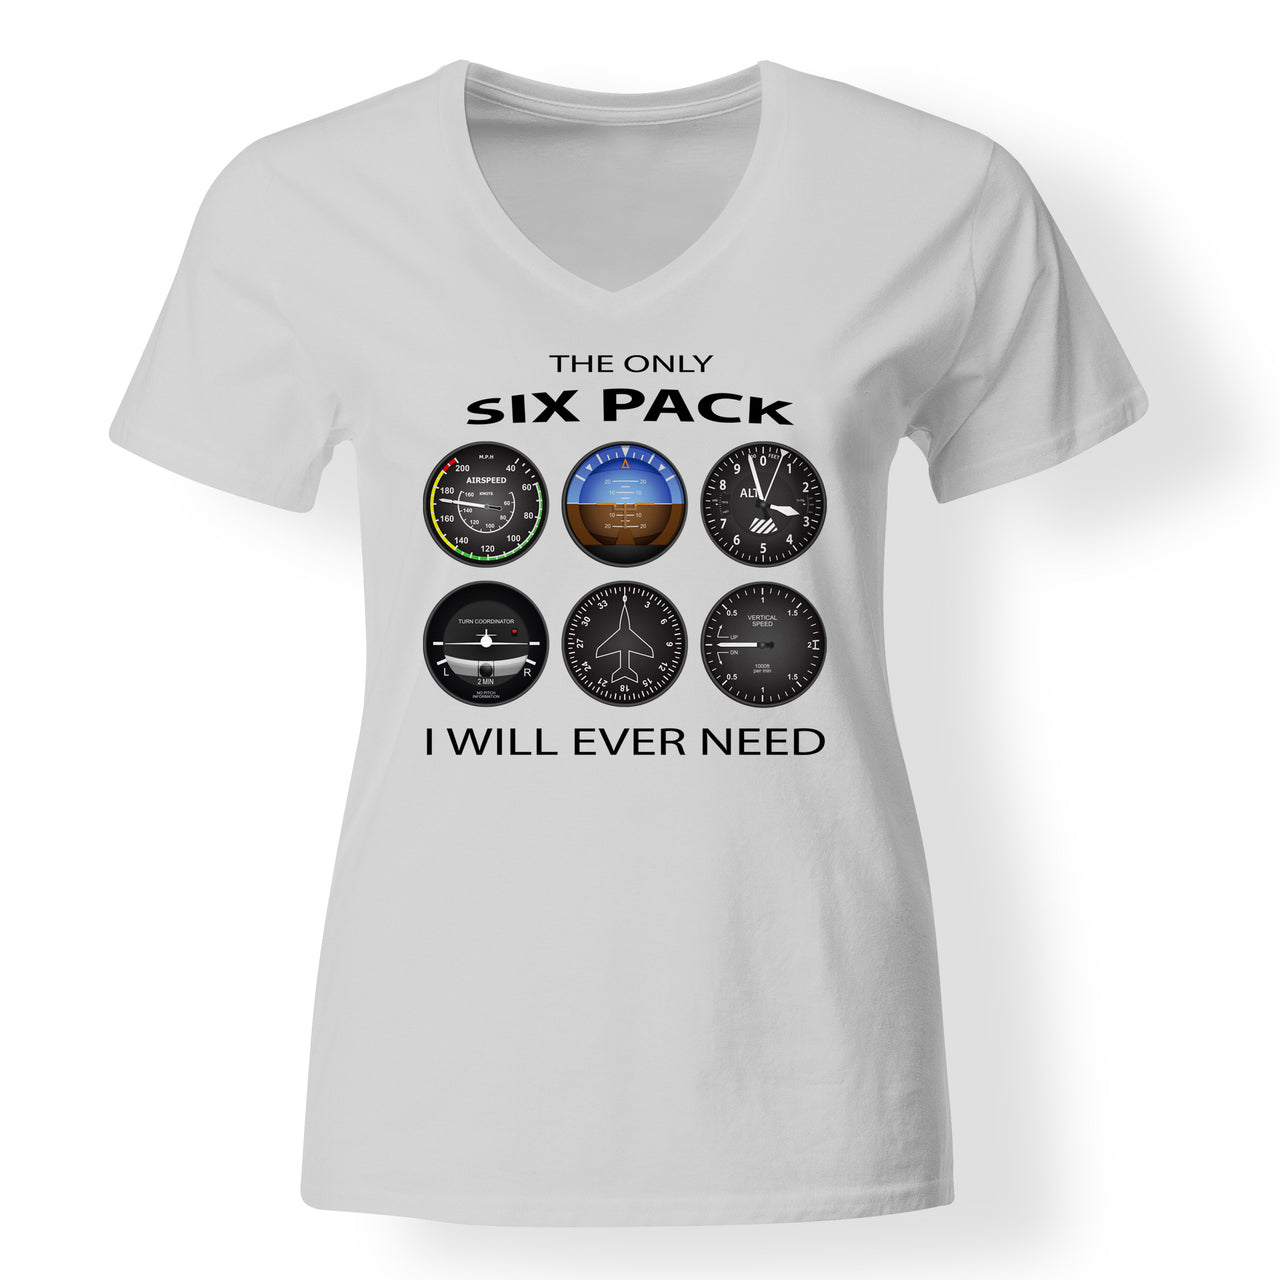 The Only Six Pack I Will Ever Need Designed V-Neck T-Shirts